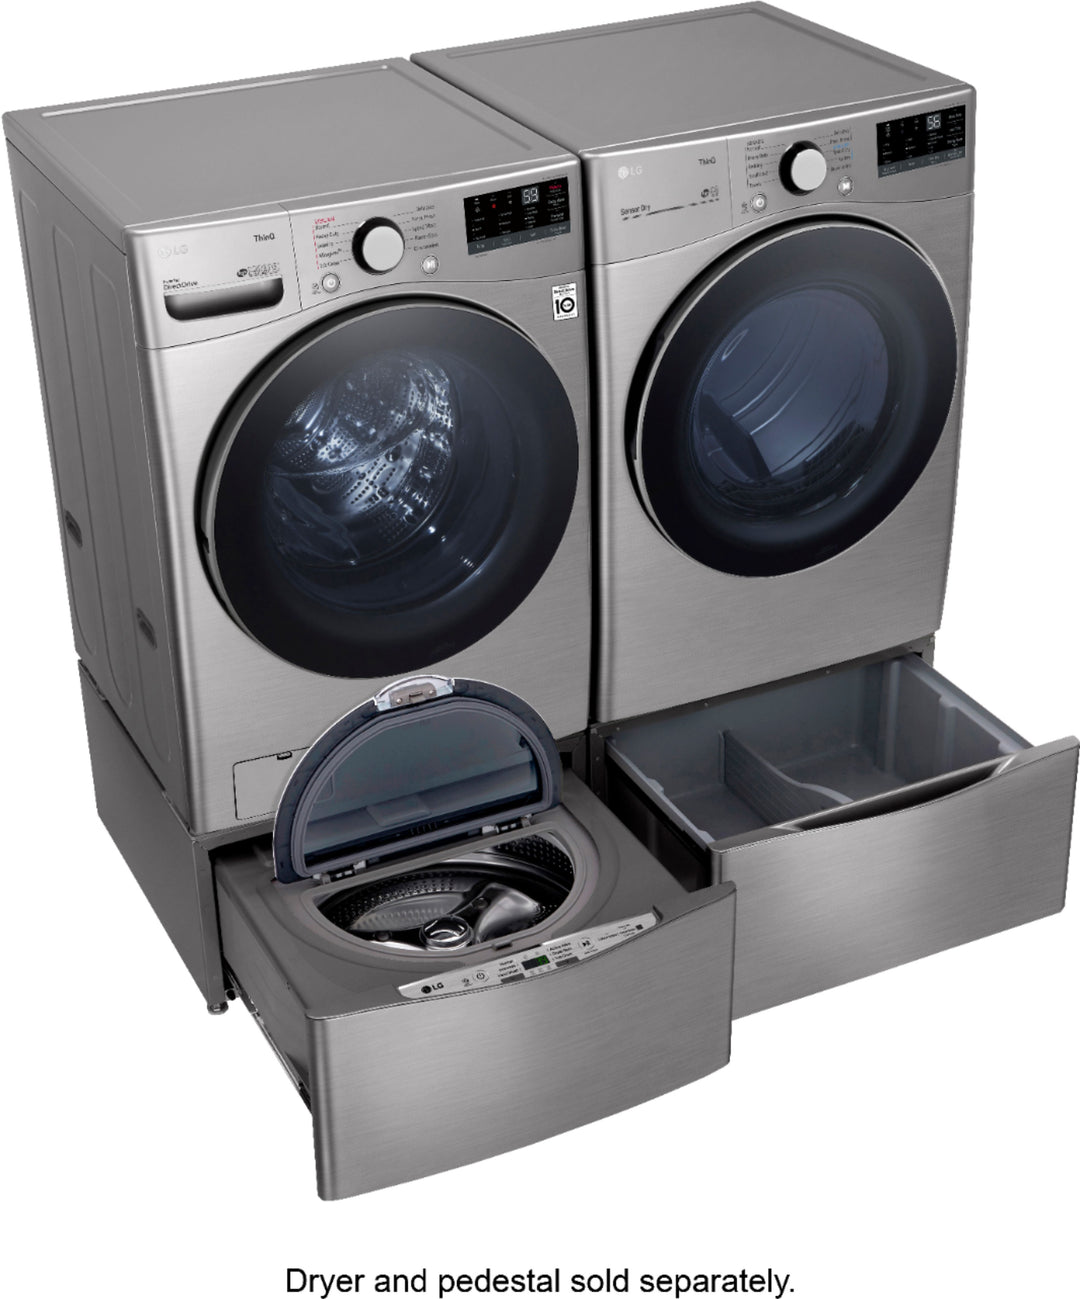 LG - 4.5 Cu. Ft. High-Efficiency Stackable Smart Front Load Washer with Steam and 6Motion Technology - Graphite steel_5